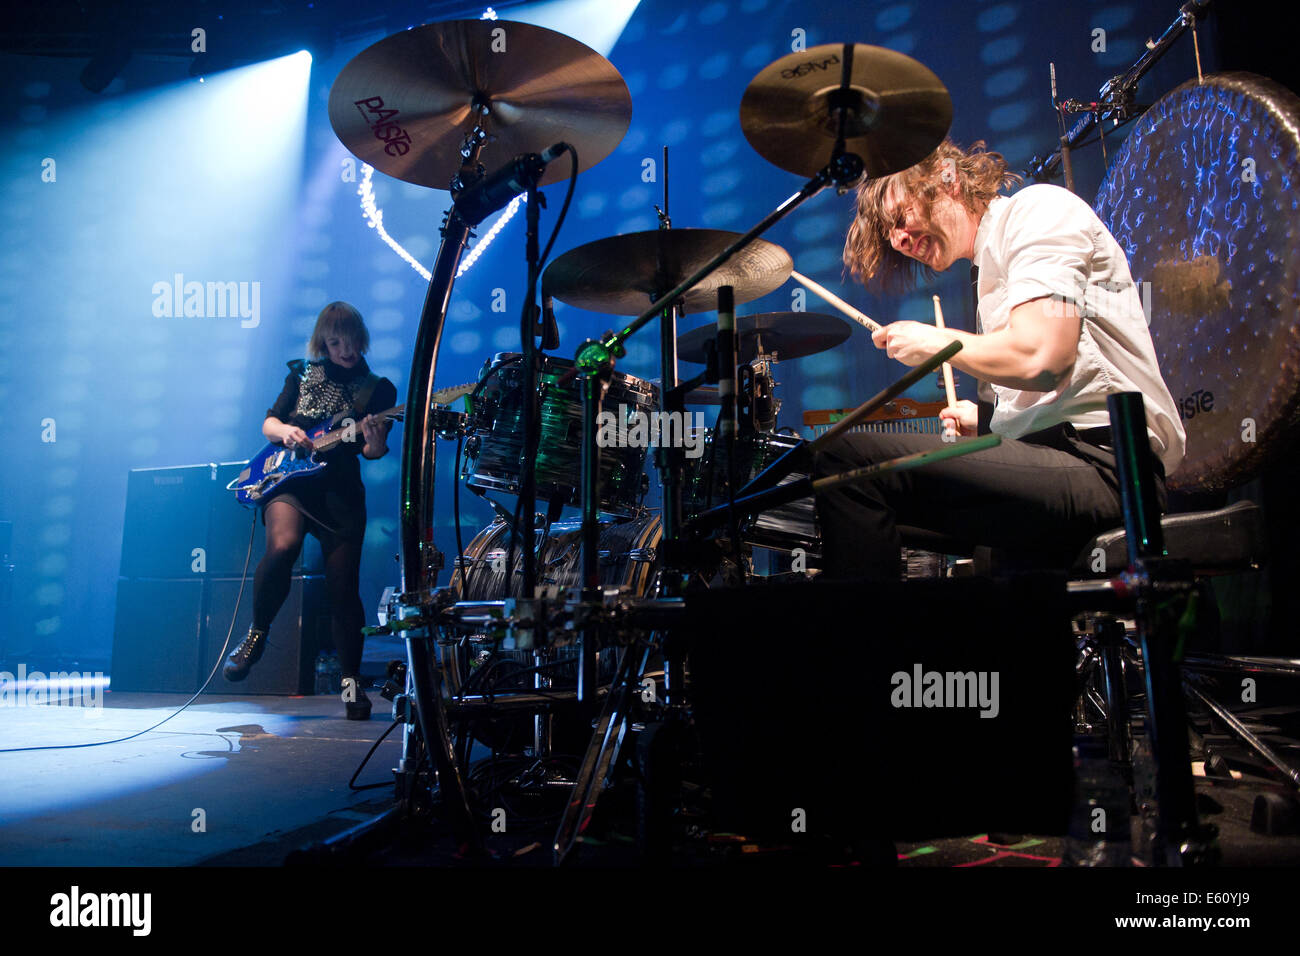 Ritzy Bryan (L) and Matt Thomas (R) of The Joy Formidable performing at The Roundhouse in London, UK Stock Photo